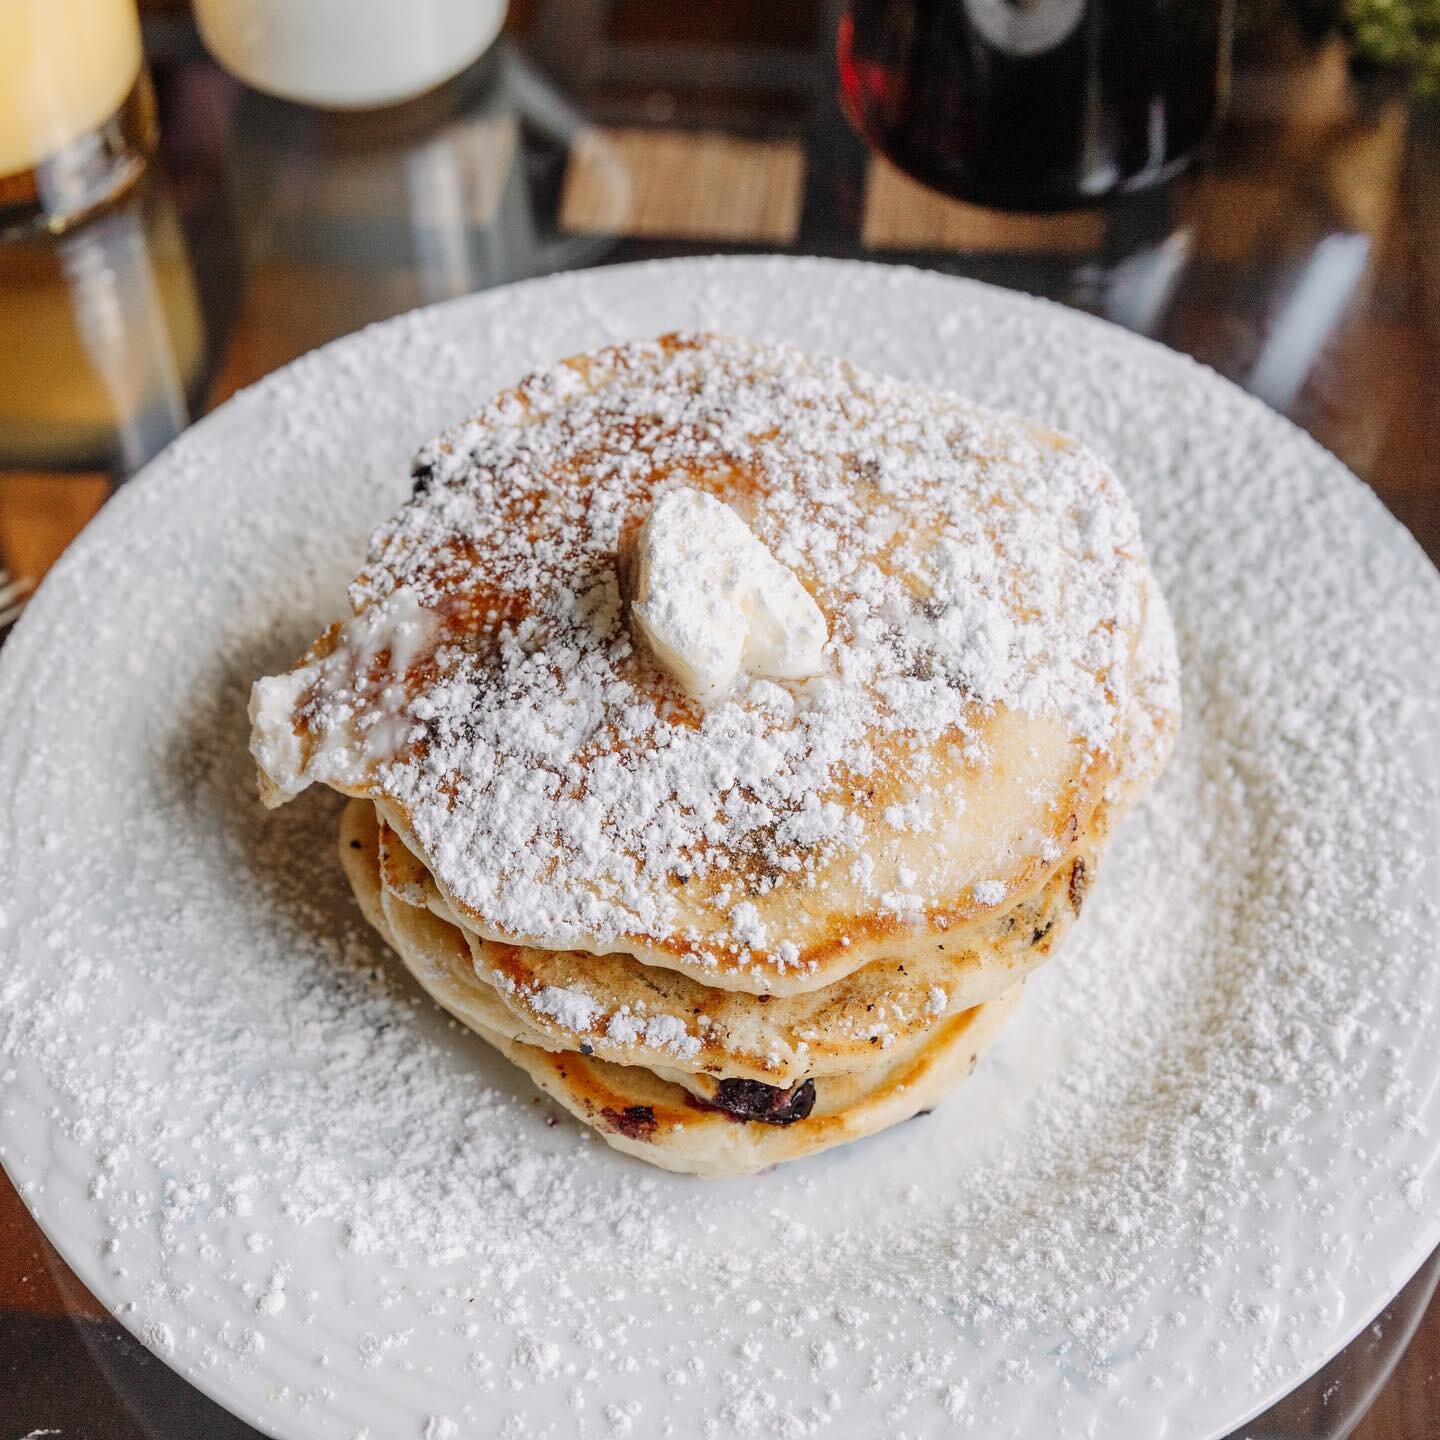 Did someone say pancakes? 😋🥞
.
Breakfast is included when you stay at the @gatewaypinehill! We offer a rotating menu of crowd pleasers but pancakes are always a favorite! Plain? Blueberry? Chocolate Chip? What is your favorite?
.
📸 and Taste Testi